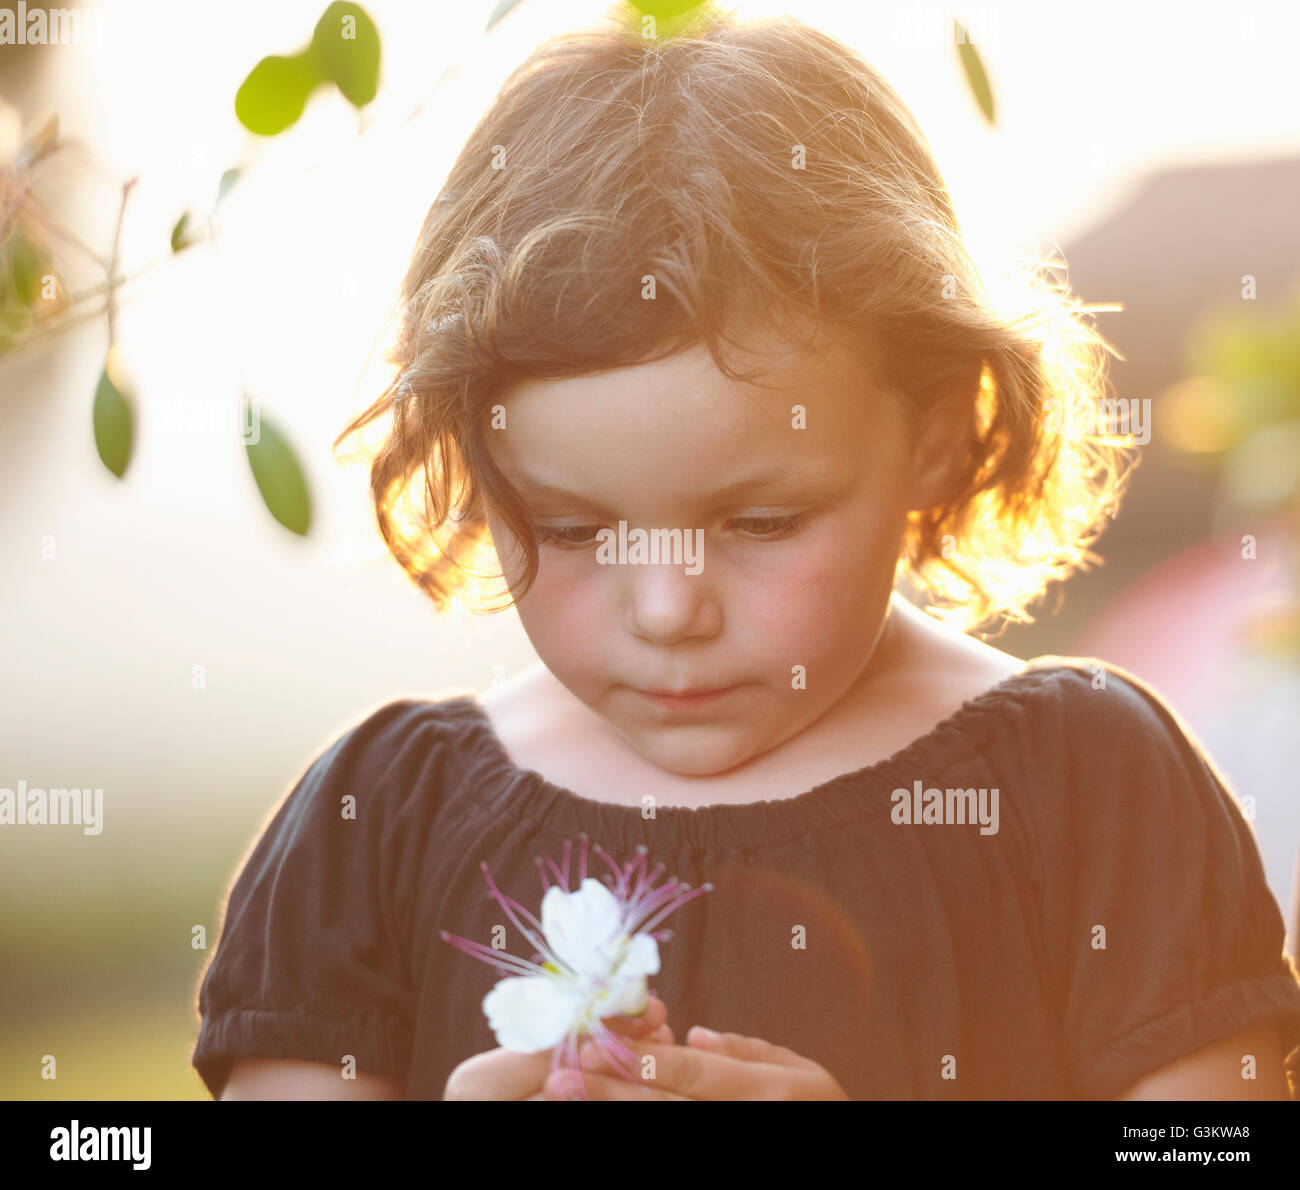 Young girl, outdoors, holding flower Stock Photo